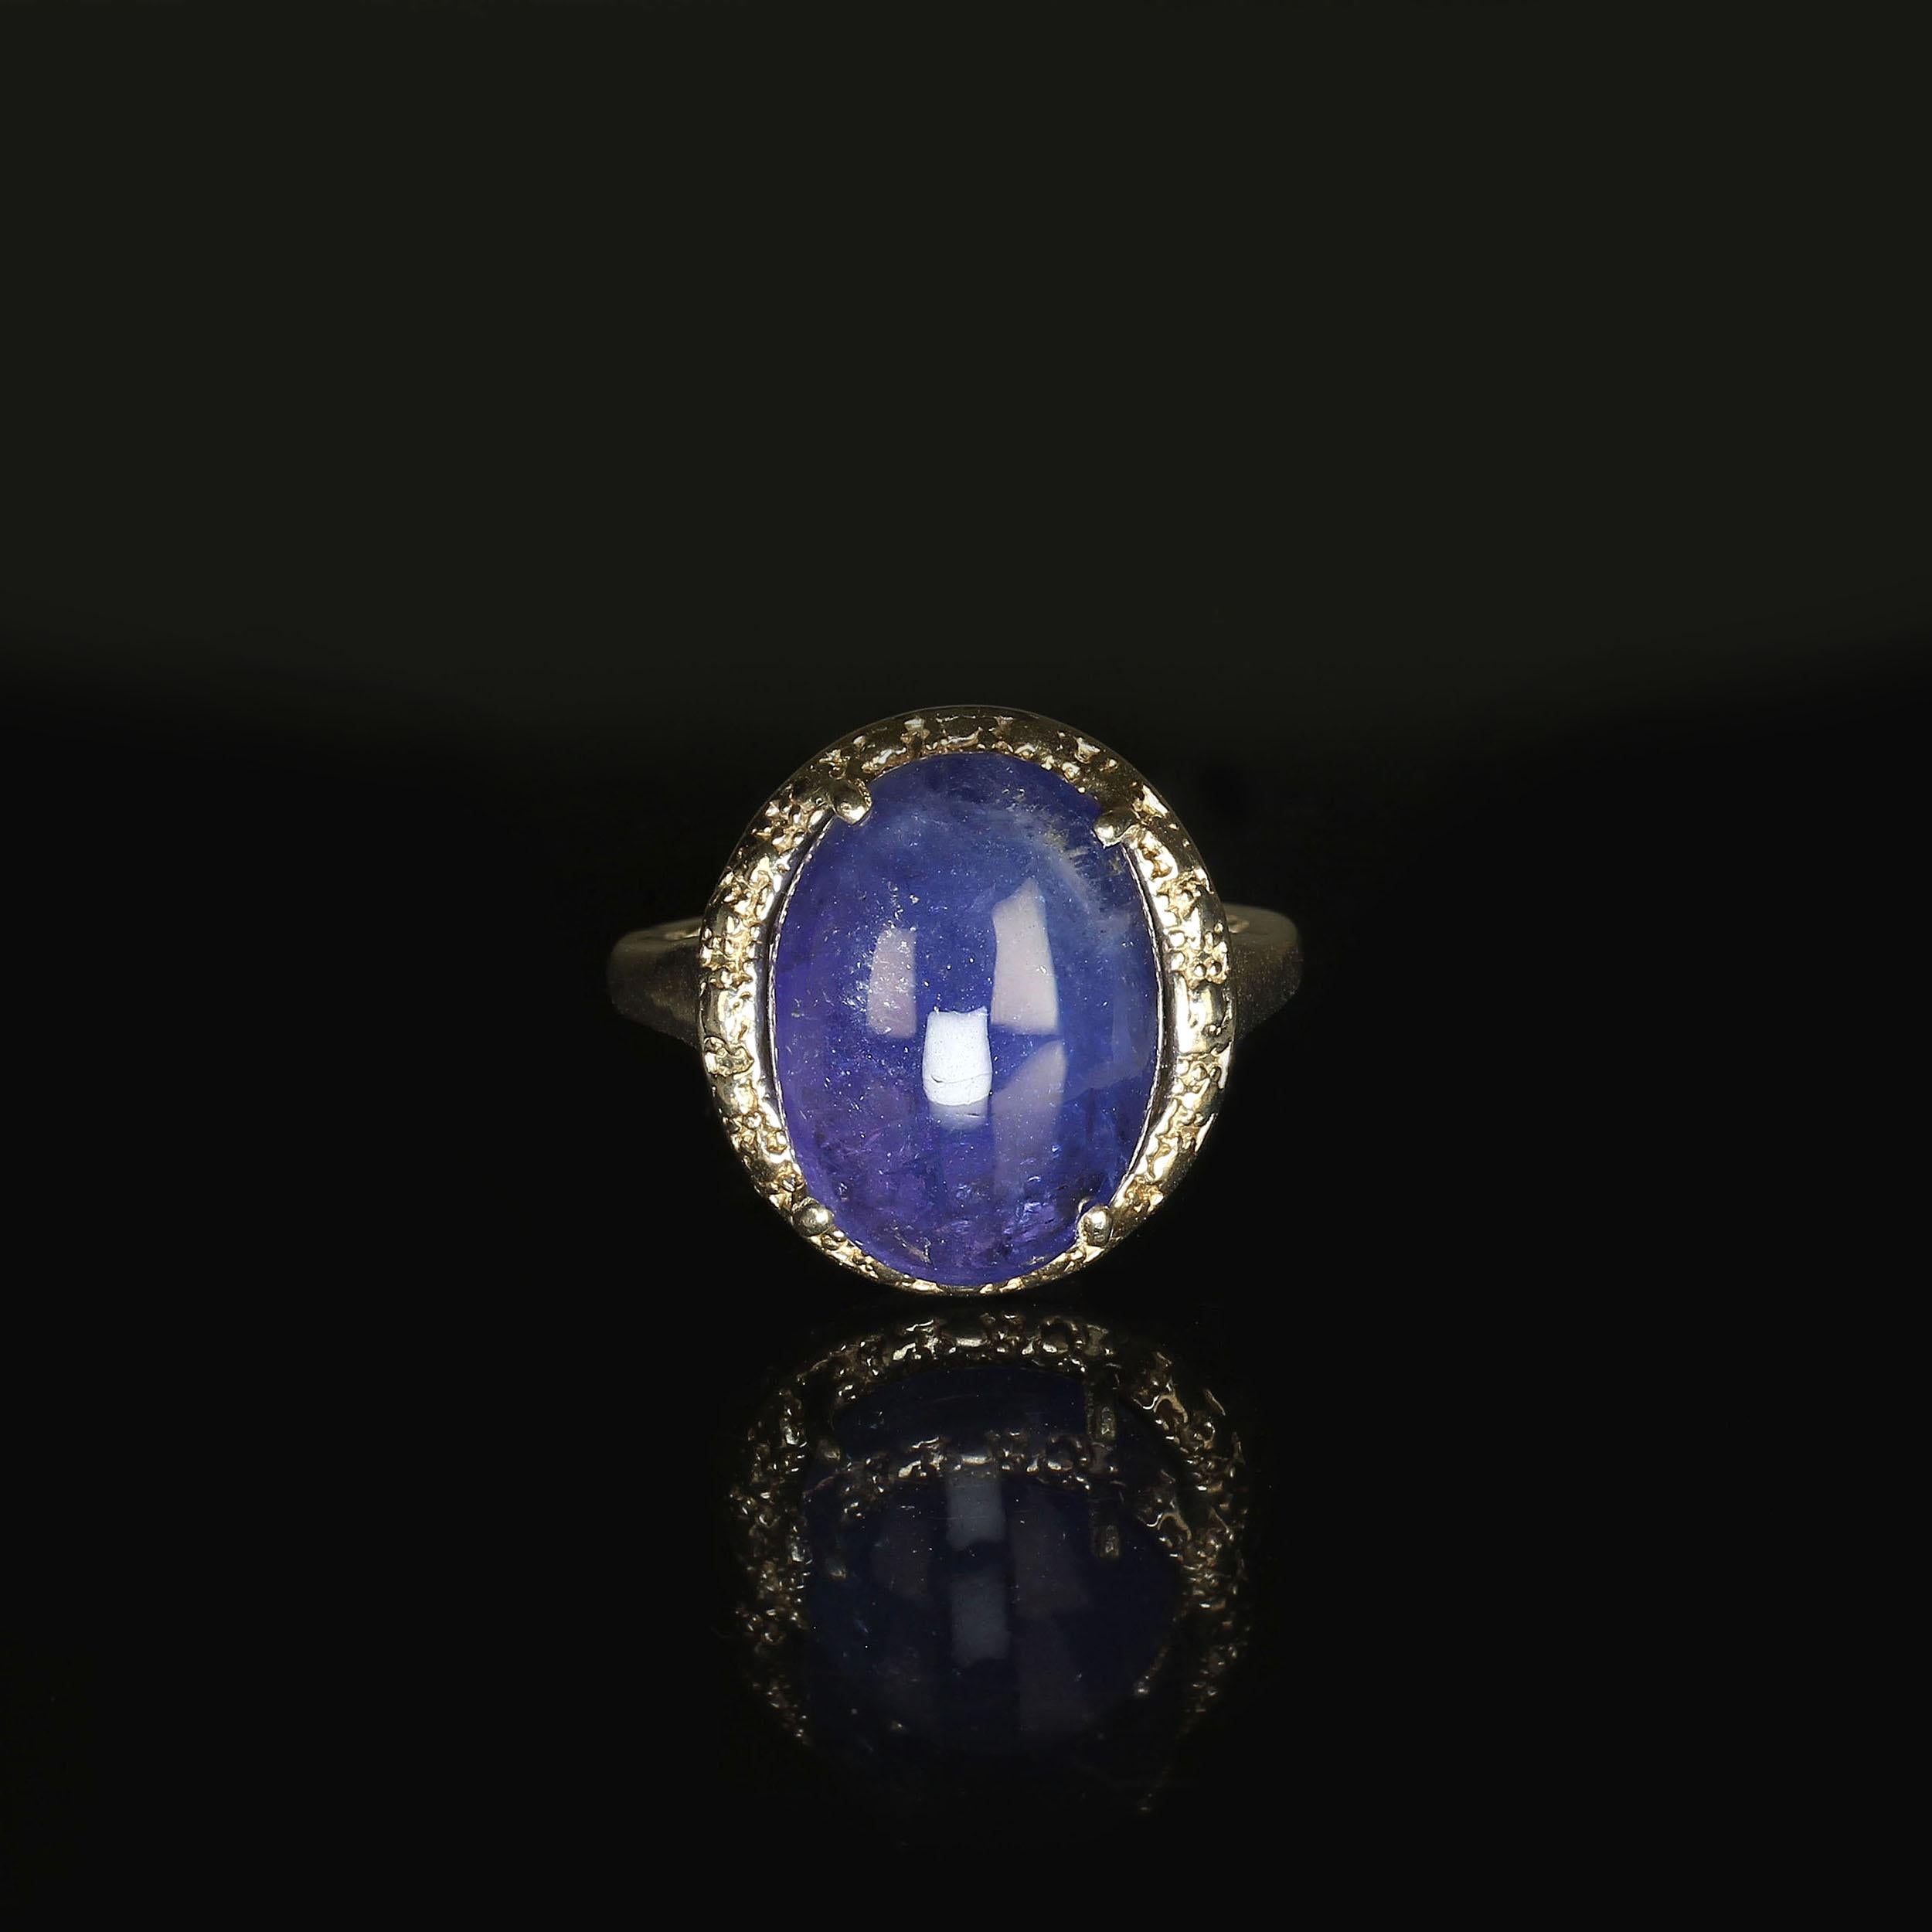 Oval Cut AJD Gorgeous Oval Tanzanite Cabochon in Sterling Silver Ring